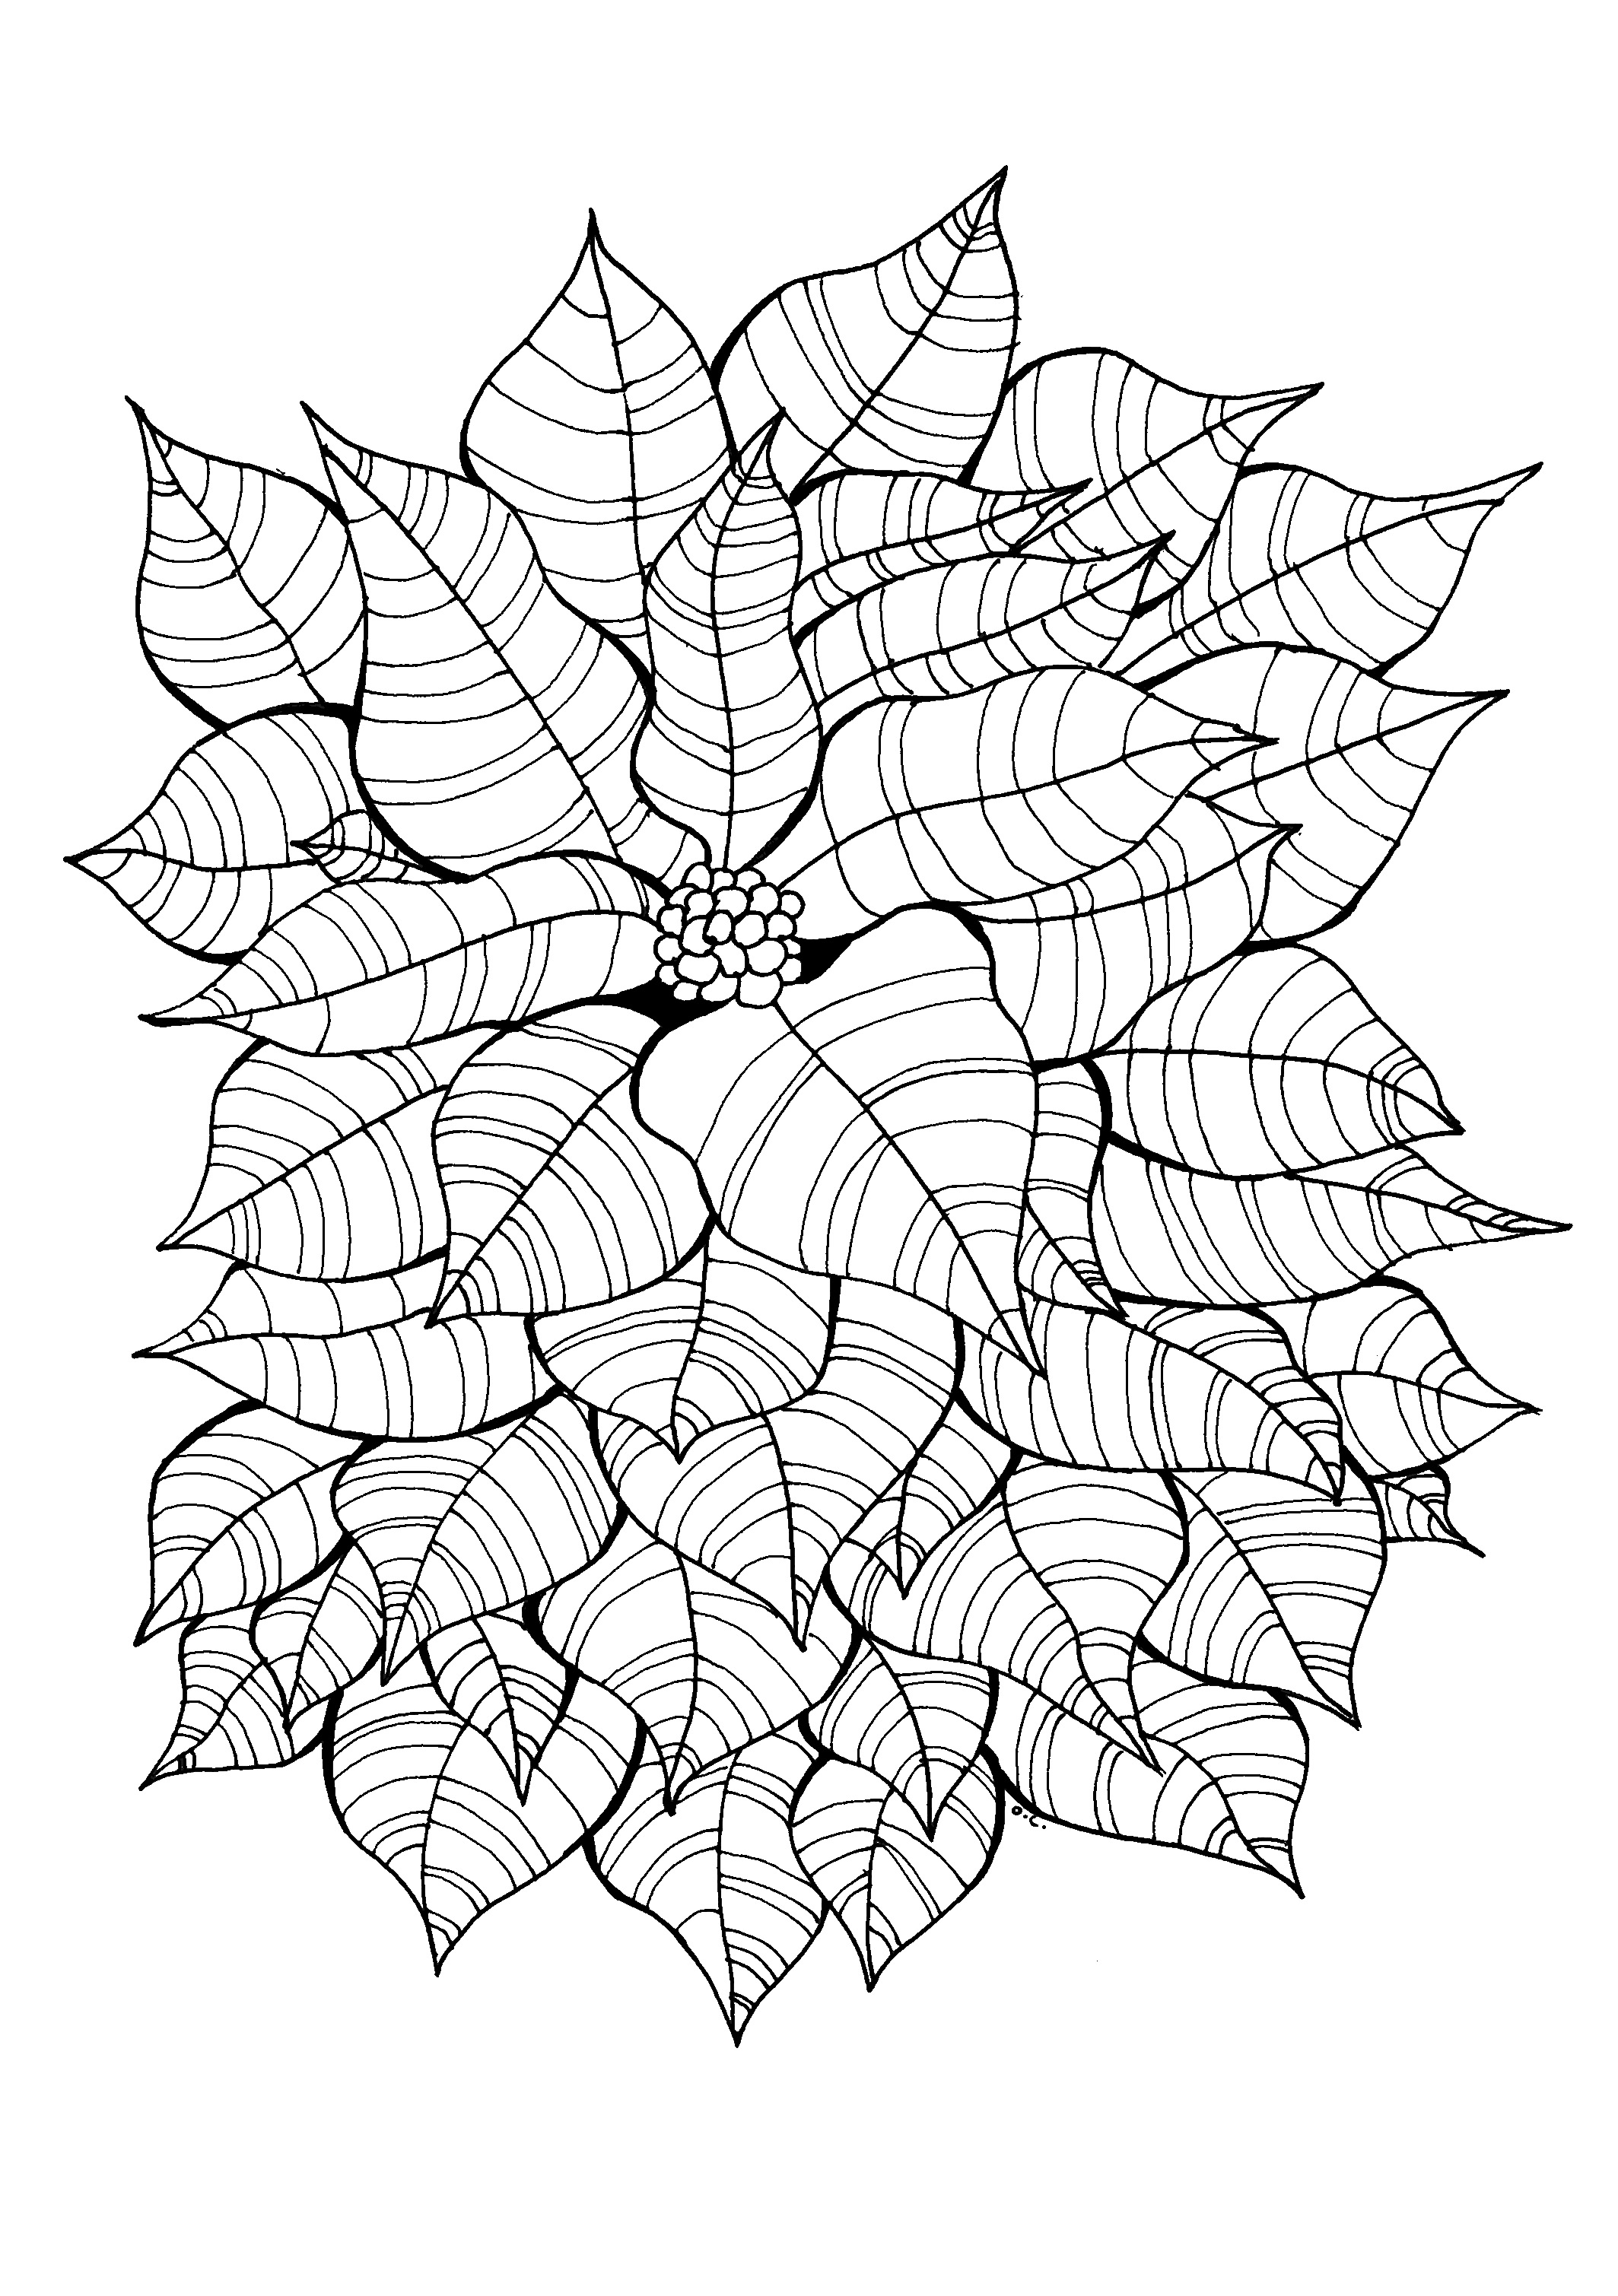 Download Simple flowers - Flowers Adult Coloring Pages